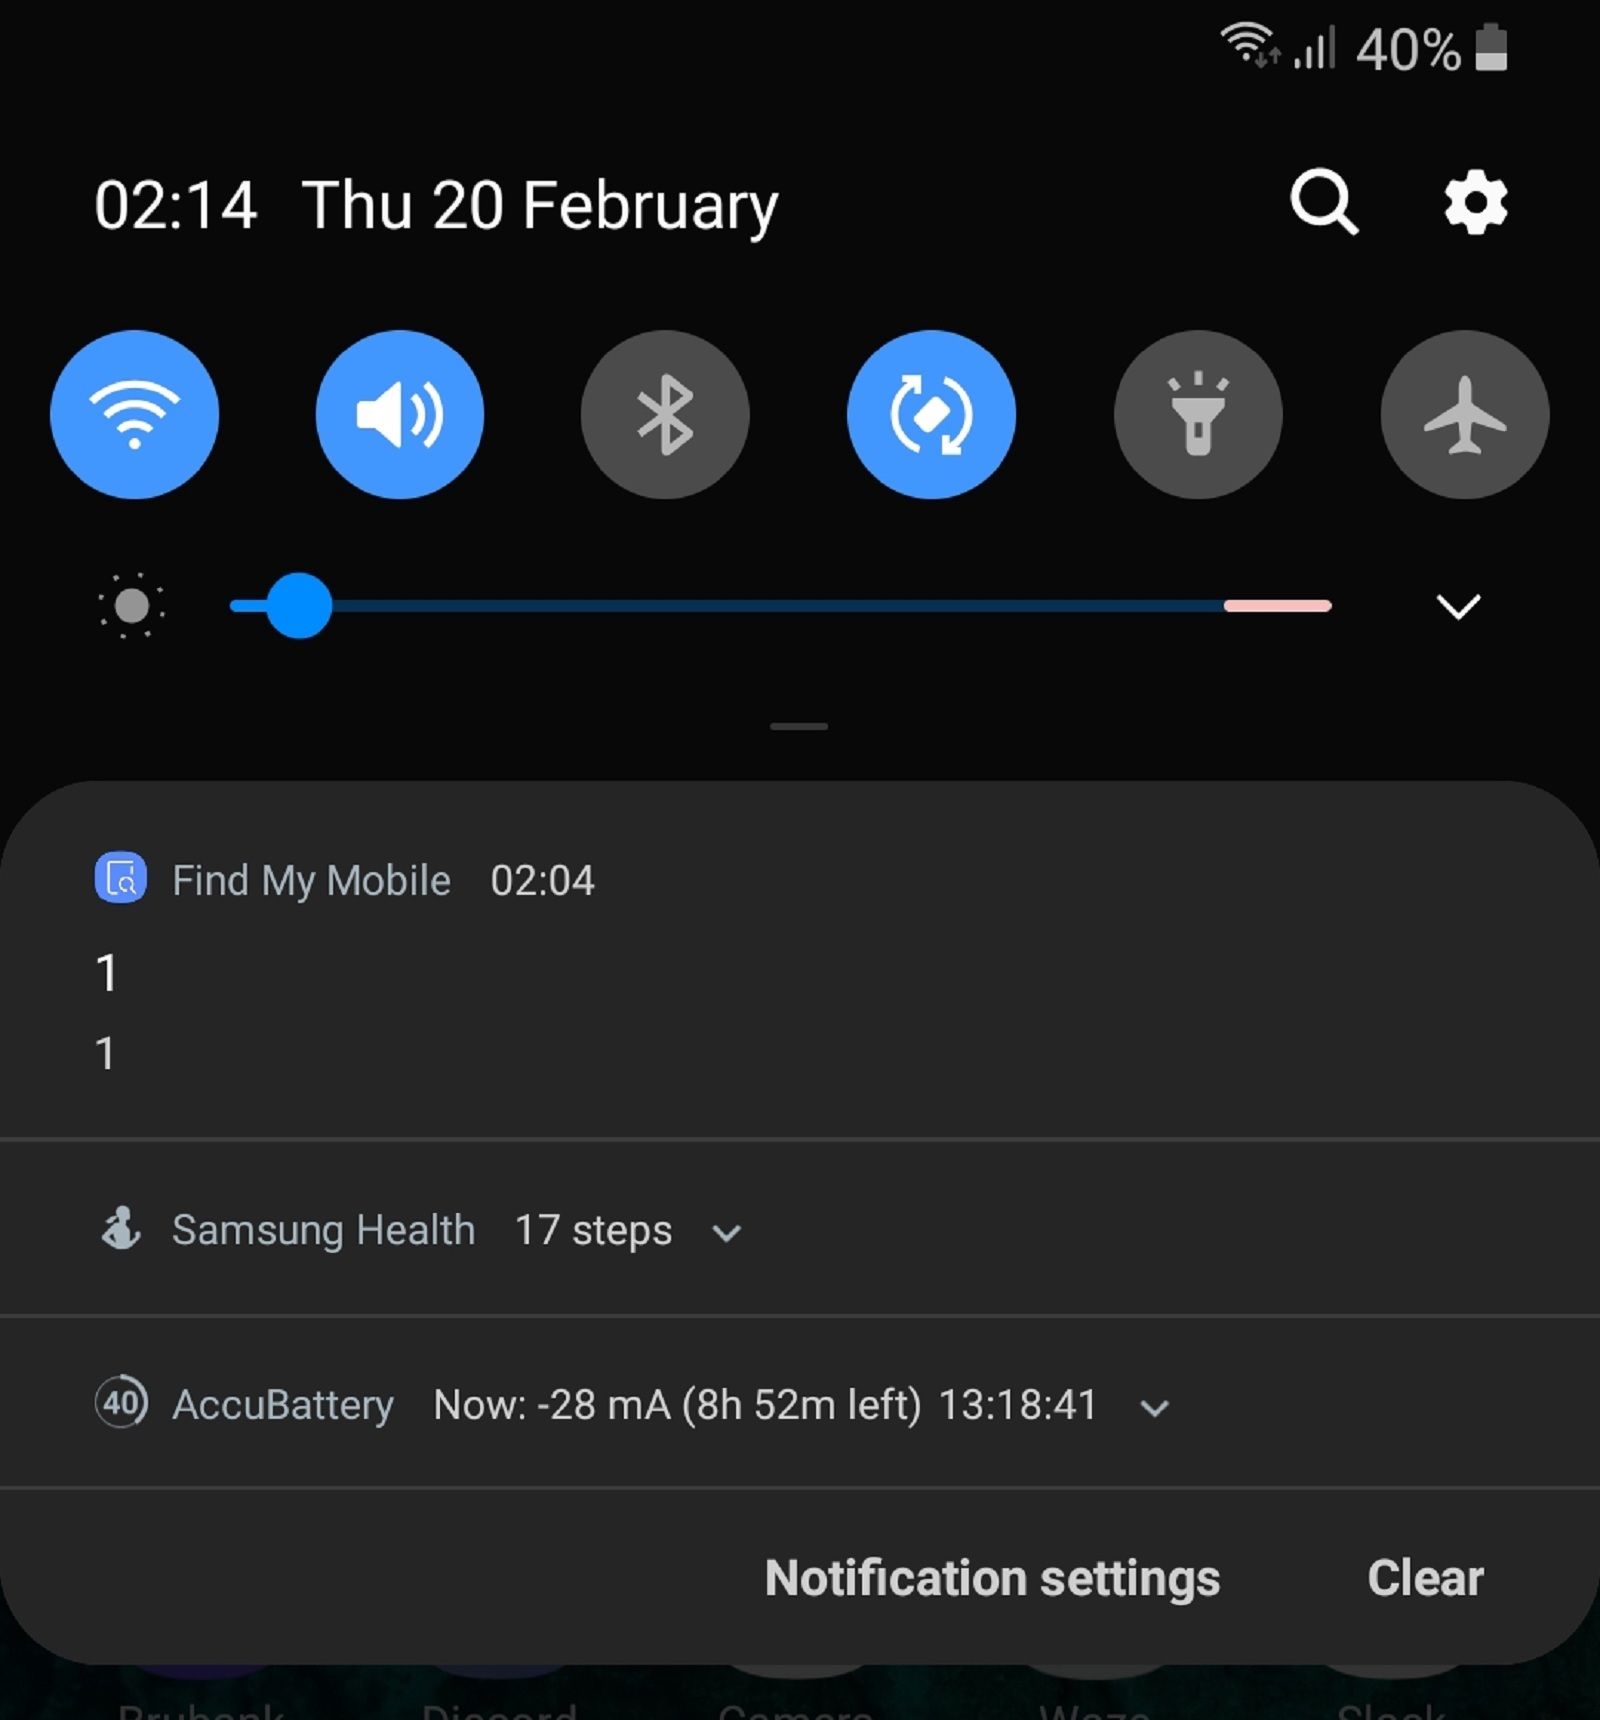 Received A Strange Notification On Your Samsung Smartphone Heres Why image 1